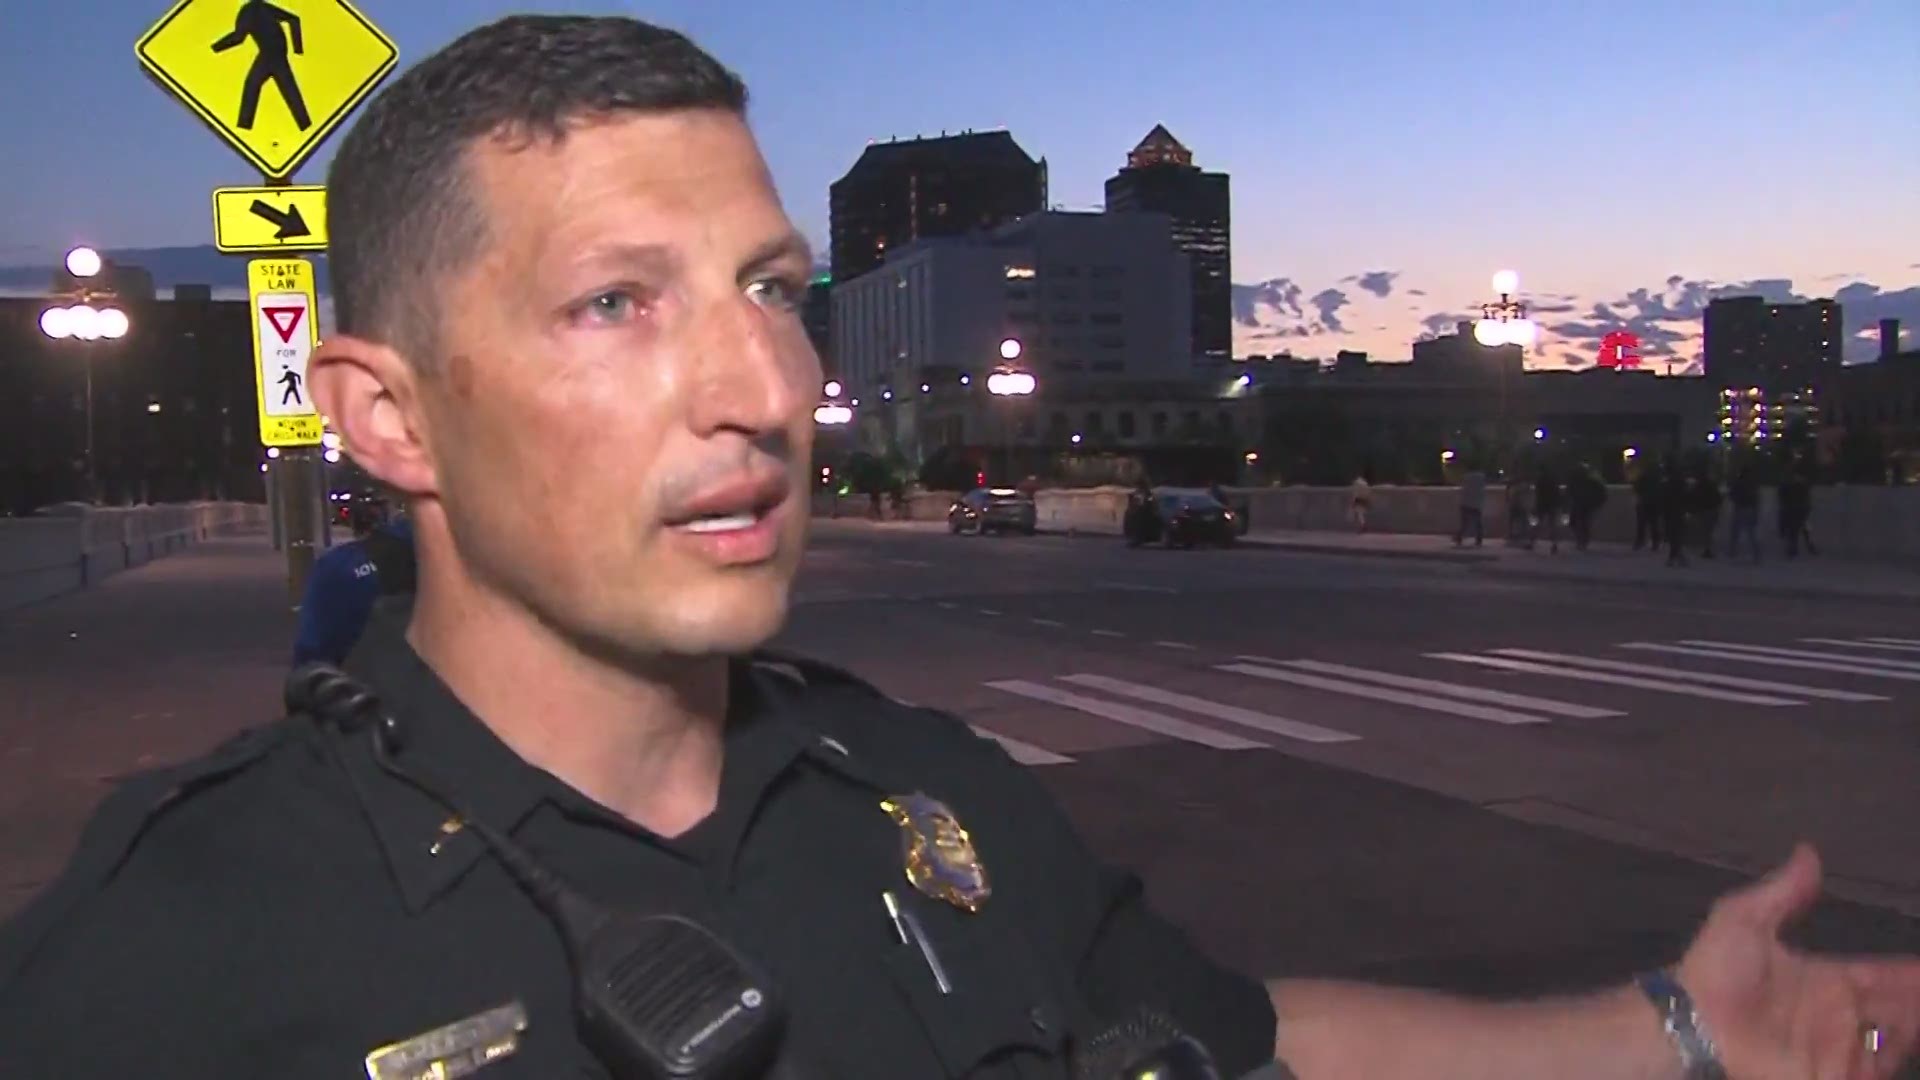 Des Moines Police Lieutenant Ryan Doty says peaceful protesting is healthy, but when violence starts, the trouble starts.